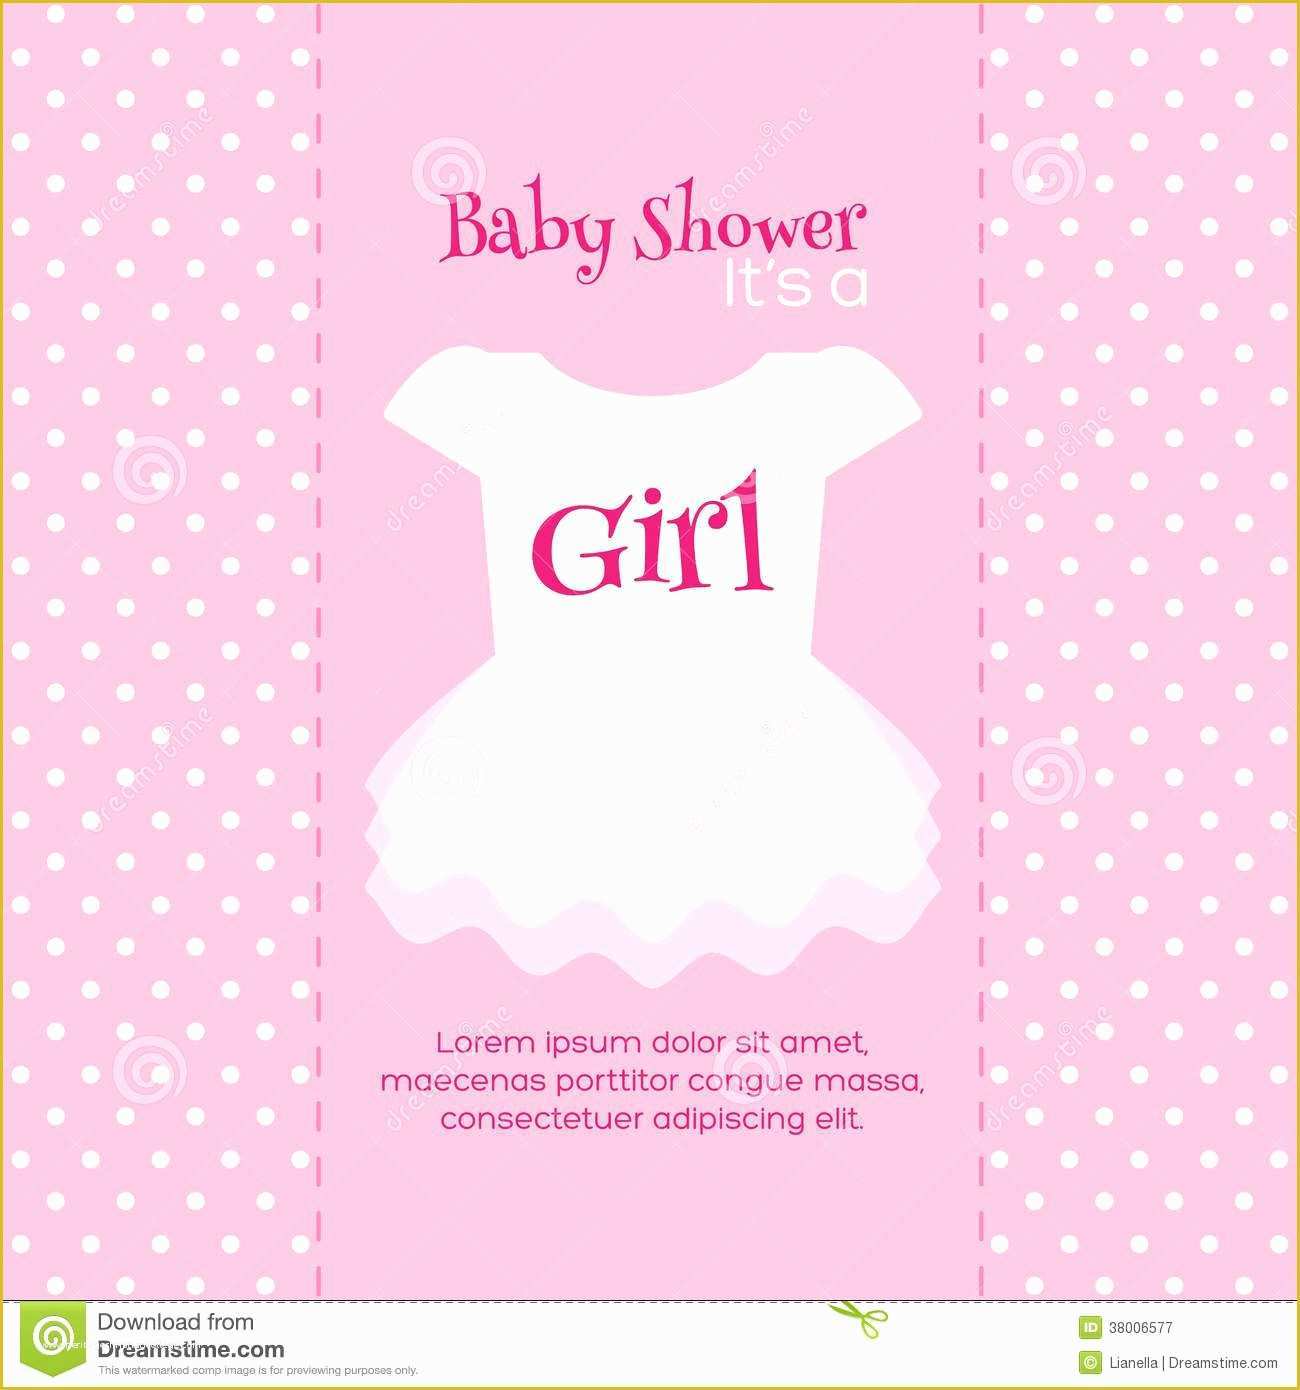 Baby Shower Card Template Free Of Baby Shower Invitations Cards Designs Free Baby Shower